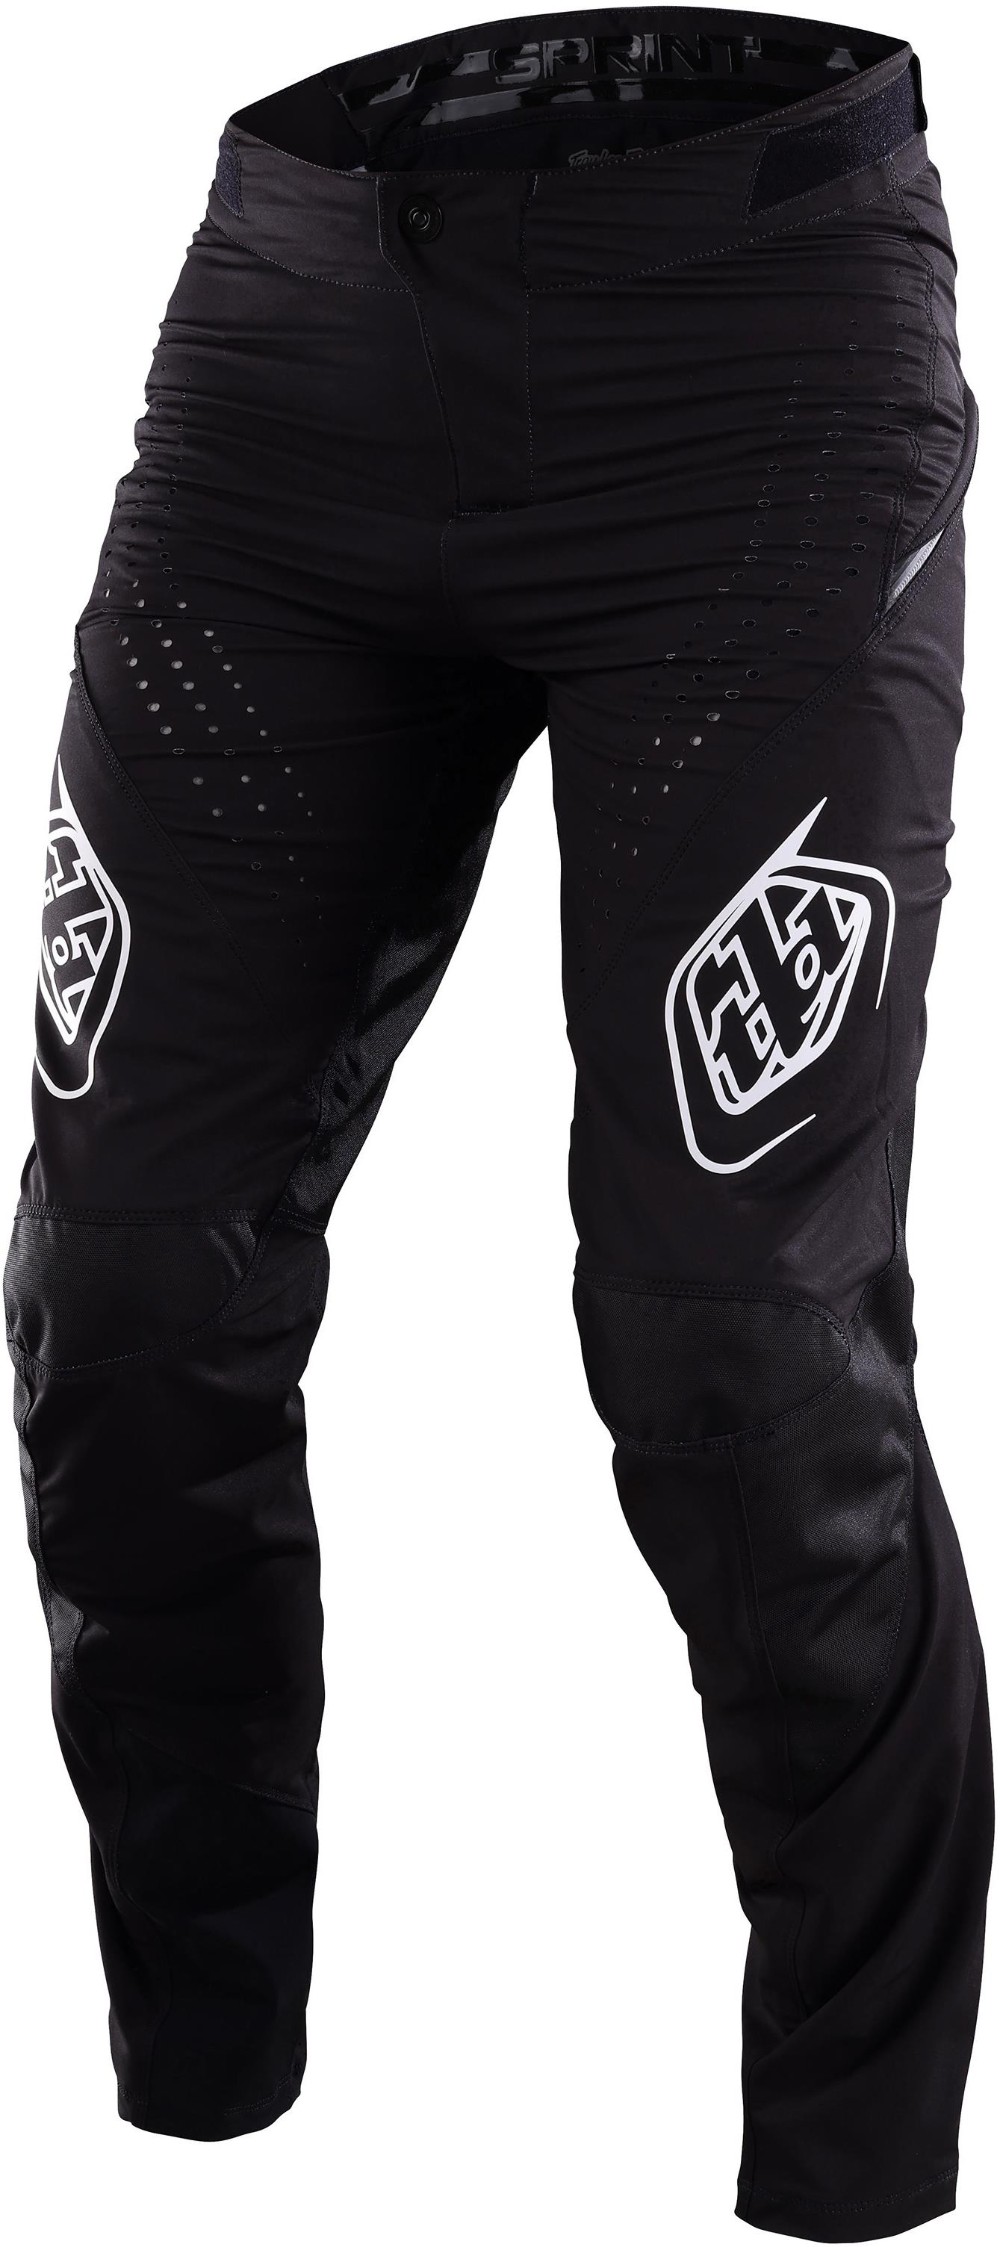 Sprint MTB Cycling Trousers image 0